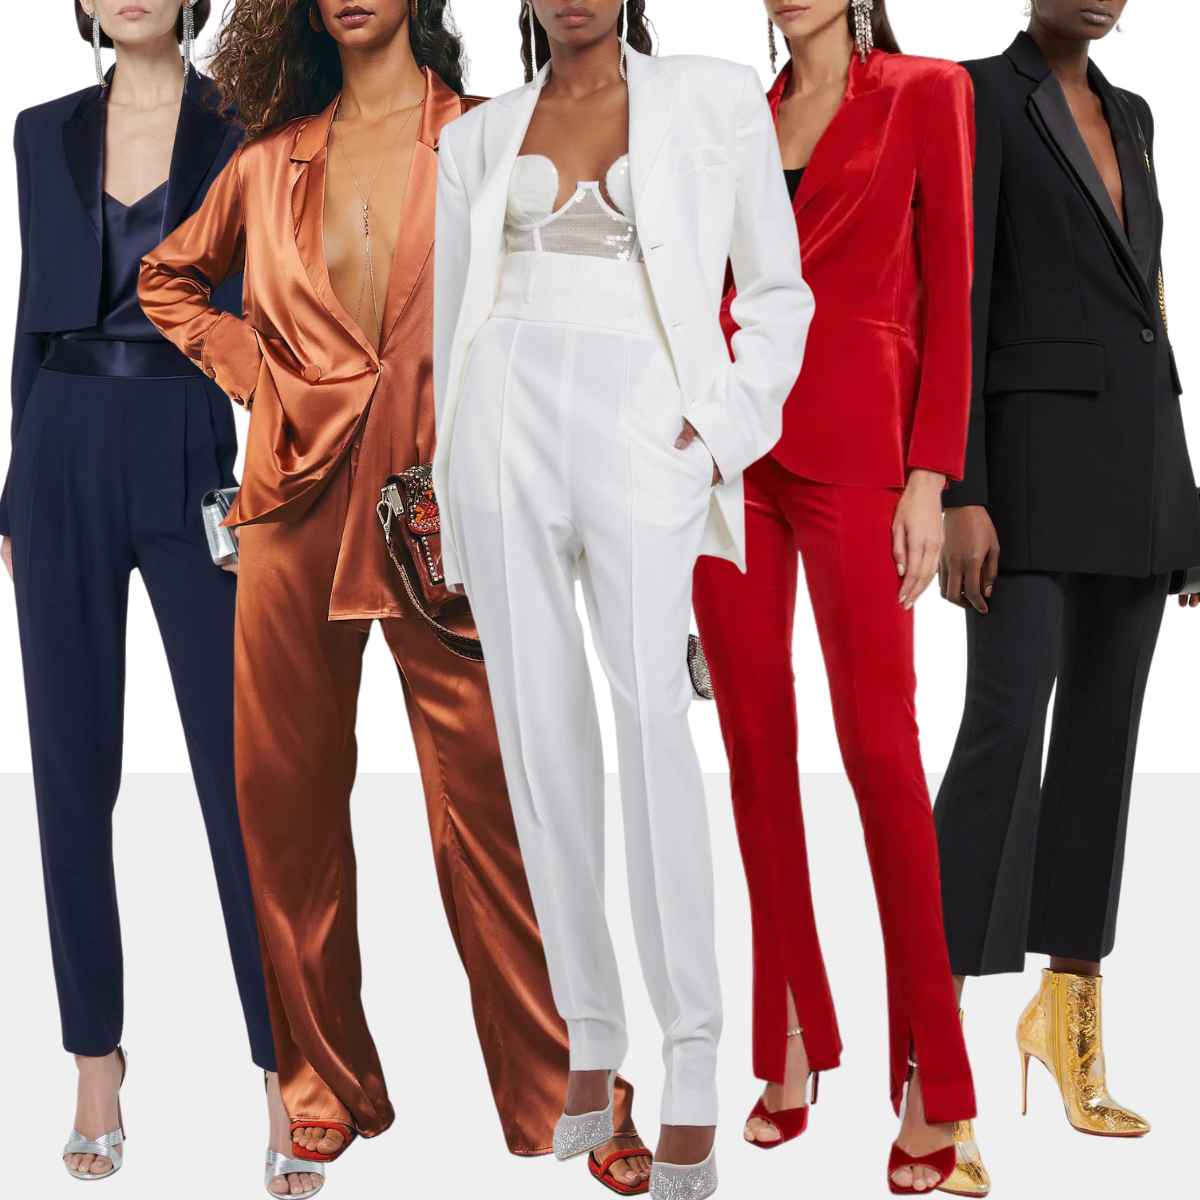 Collage of 5 women wearing various fancy pantsuits with heels.